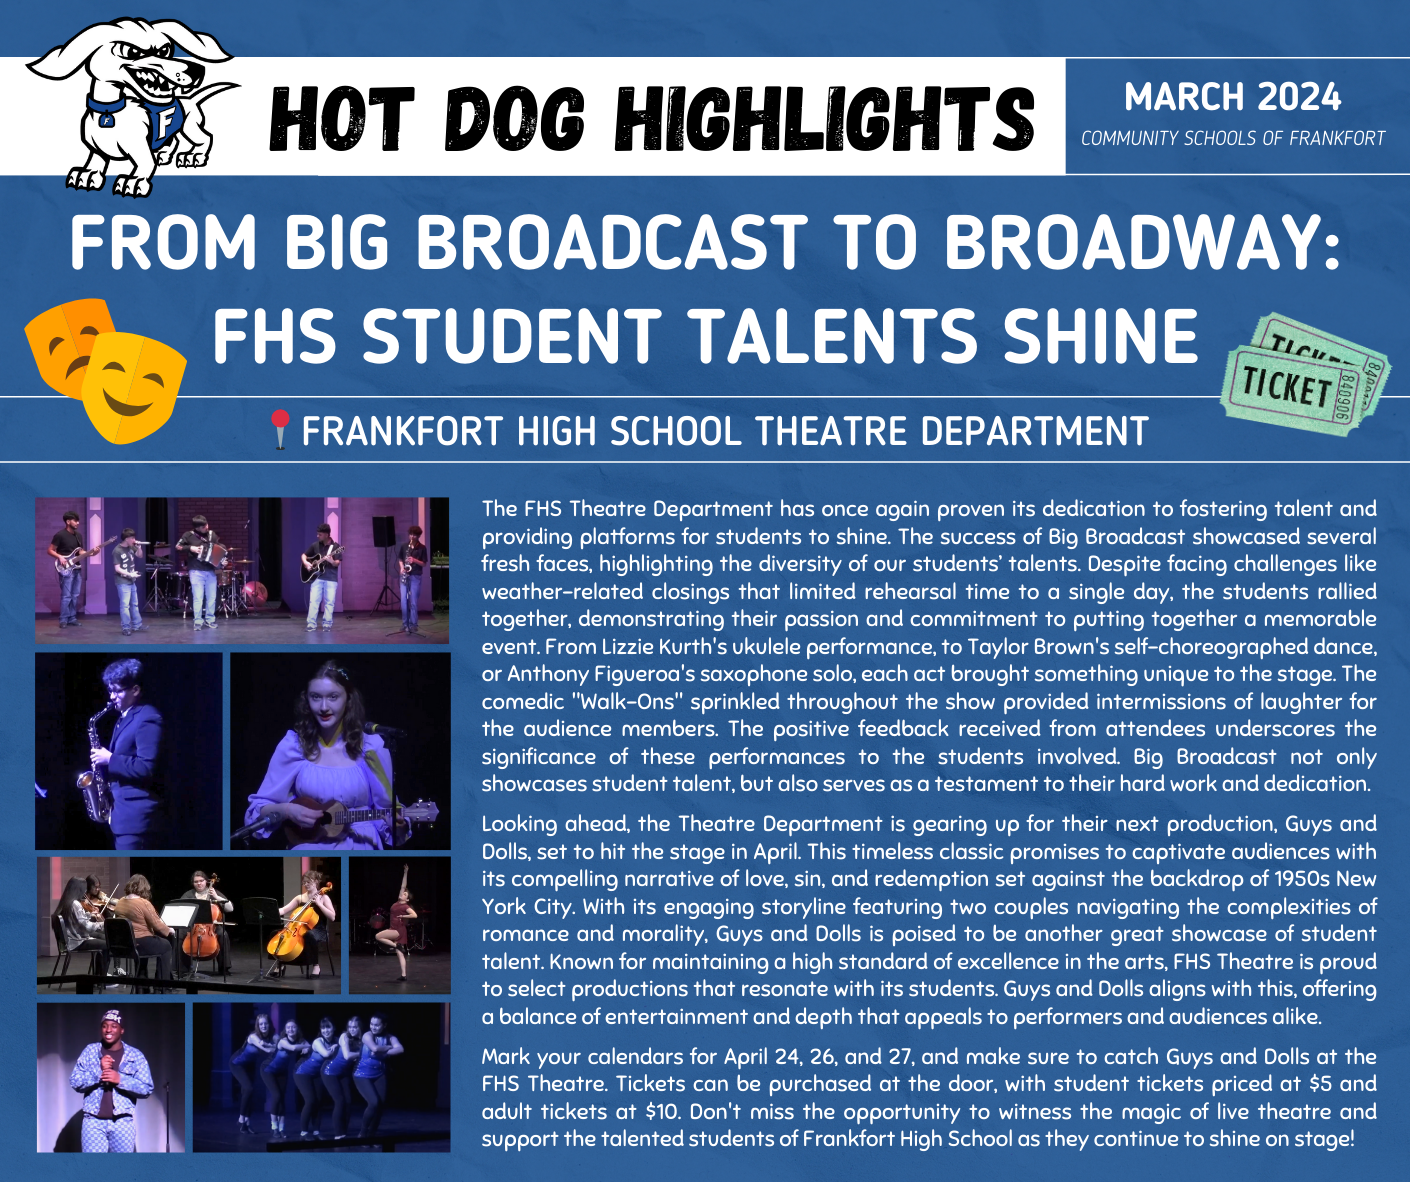 The FHS Theatre Department has once again proven its dedication to fostering talent and providing platforms for students to shine. The success of Big Broadcast showcased several fresh faces, highlighting the diversity of our students’ talents. Despite facing challenges like weather-related closings that limited rehearsal time to a single day, the students rallied together, demonstrating their passion and commitment to putting together a memorable event. From Lizzie Kurth's ukulele performance, to Taylor Brown's self-choreographed dance, or Anthony Figueroa's saxophone solo, each act brought something unique to the stage. The comedic "Walk-Ons" sprinkled throughout the show provided intermissions of laughter for the audience members. The positive feedback received from attendees underscores the significance of these performances to the students involved. Big Broadcast not only showcases student talent, but also serves as a testament to their hard work and dedication.  Looking ahead, the Theatre Department is gearing up for their next production, Guys and Dolls, set to hit the stage in April. This timeless classic promises to captivate audiences with its compelling narrative of love, sin, and redemption set against the backdrop of 1950s New York City. With its engaging storyline featuring two couples navigating the complexities of romance and morality, Guys and Dolls is poised to be another great showcase of student talent. Known for maintaining a high standard of excellence in the arts, FHS Theatre is proud to select productions that resonate with its students. Guys and Dolls aligns with this, offering a balance of entertainment and depth that appeals to performers and audiences alike.  Mark your calendars for April 24, 26, and 27, and make sure to catch Guys and Dolls at the FHS Theatre. Tickets can be purchased at the door, with student tickets priced at $5 and adult tickets at $10. Don't miss the opportunity to witness the magic of live theatre and support the talented students of Frankfort High School as they continue to shine on stage!